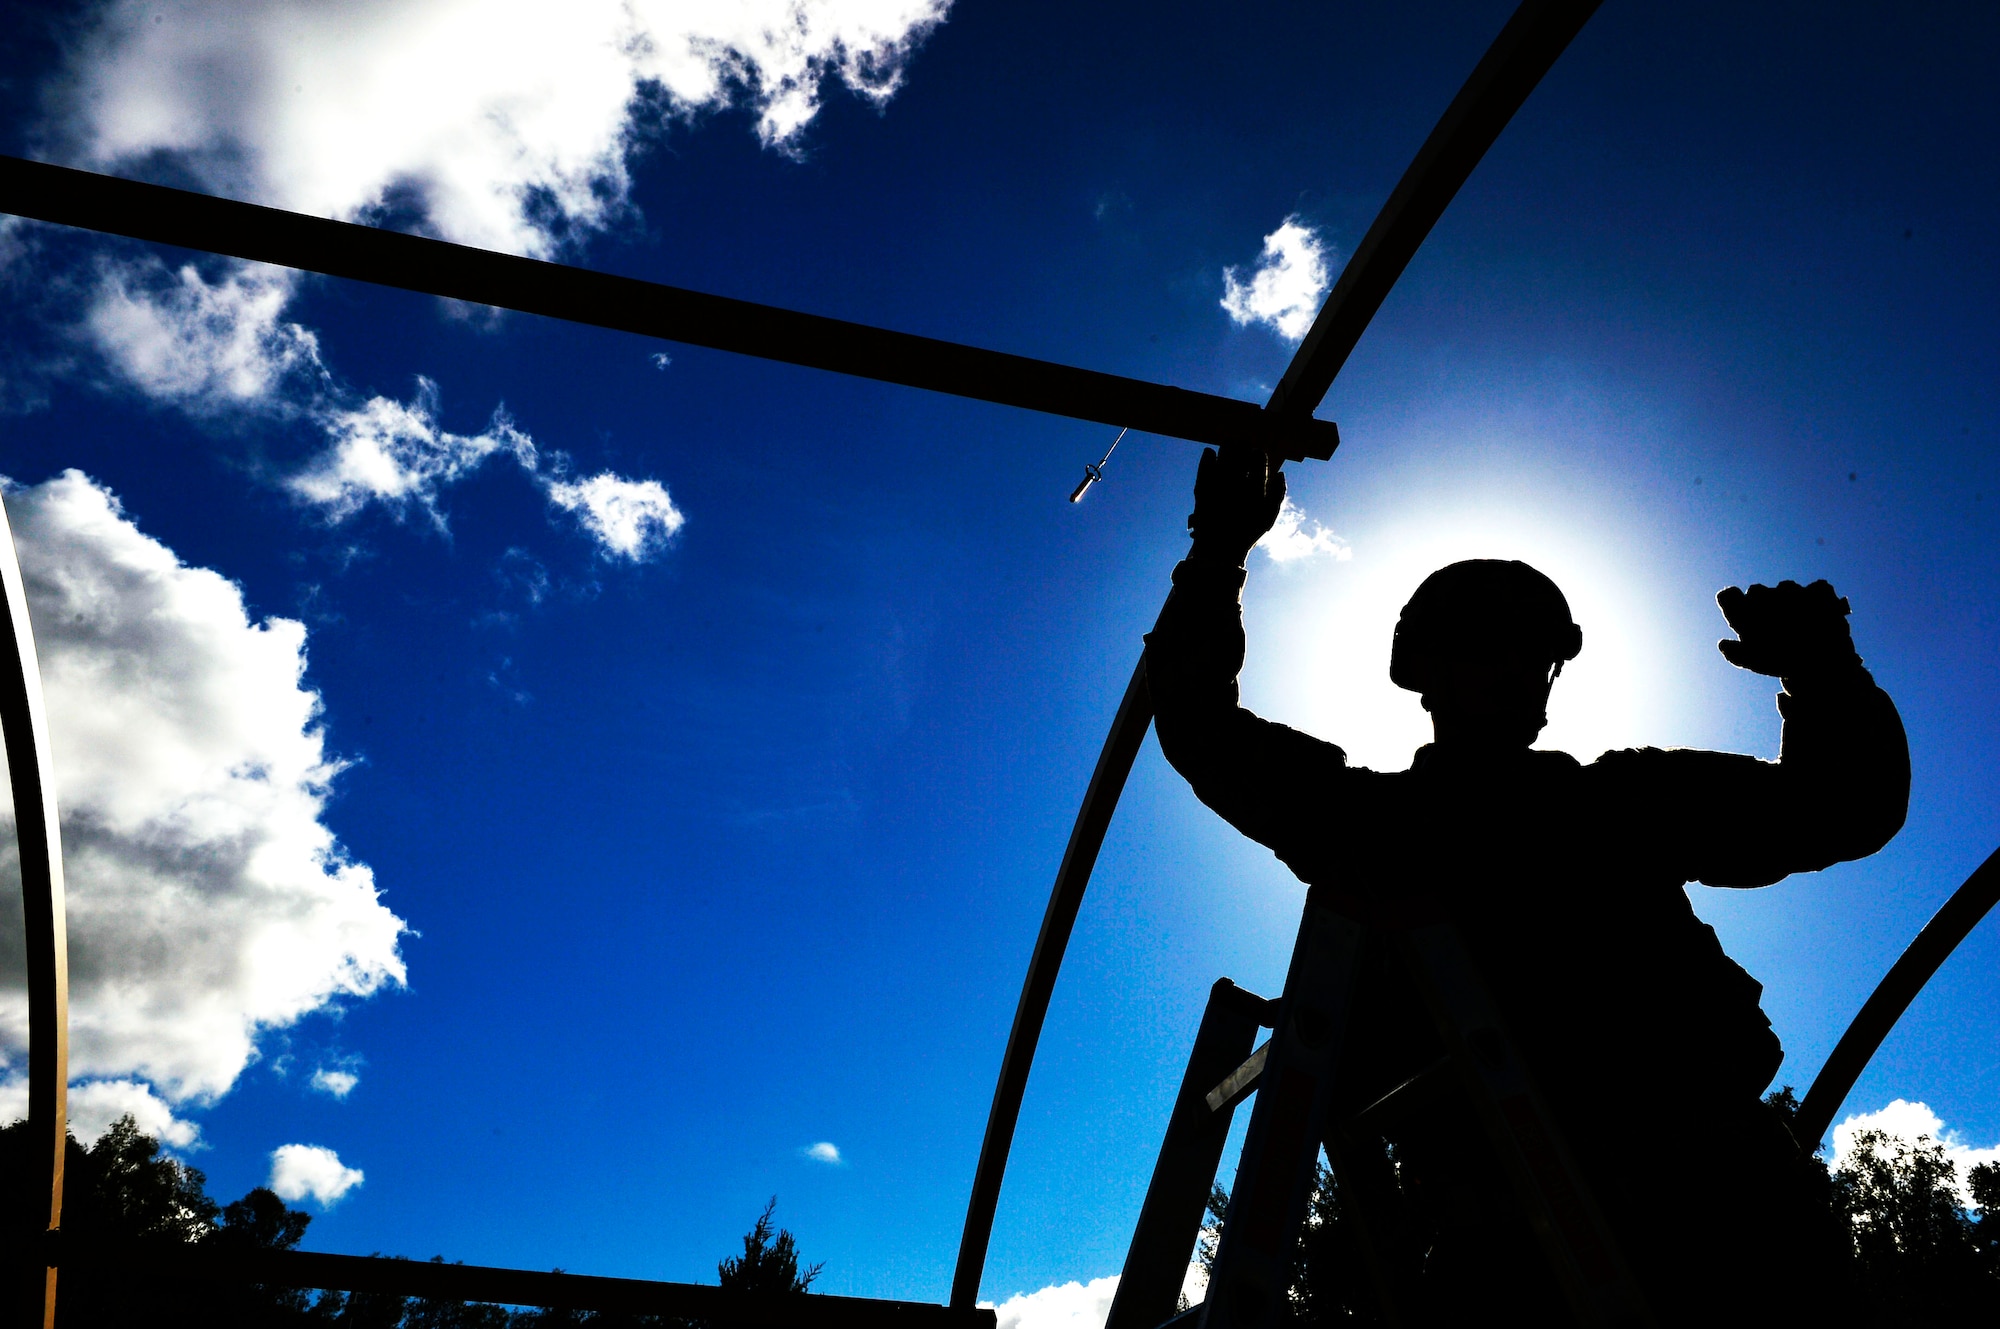 U.S. Air Force Tech. Sgt. Joshua Todd, 435th Contingency Response Squadron training manager, sets up a frame while helping build a tent Ramstein Air Base, Germany, Sept. 25, 2018. Airmen assigned to the 435th Contingency Response Group come from a variety of Air Force specialty codes train in numerous contingency response tasks. (U.S. Air Force photo by Senior Airman Joshua Magbanua)